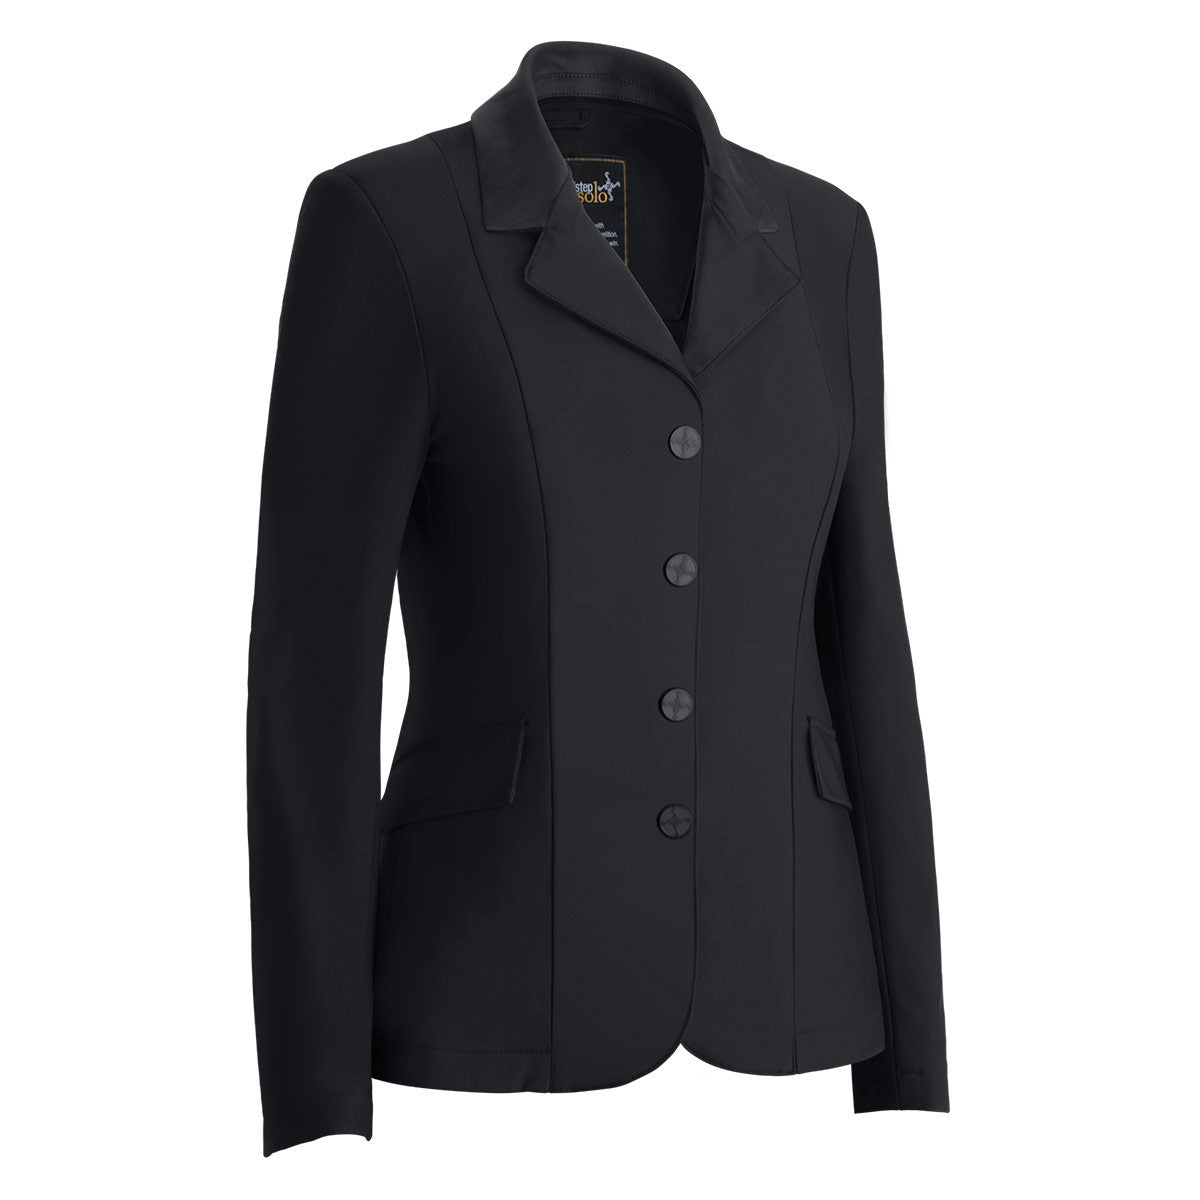 Ladies' Tredstep Solo Pro Competition Jacket